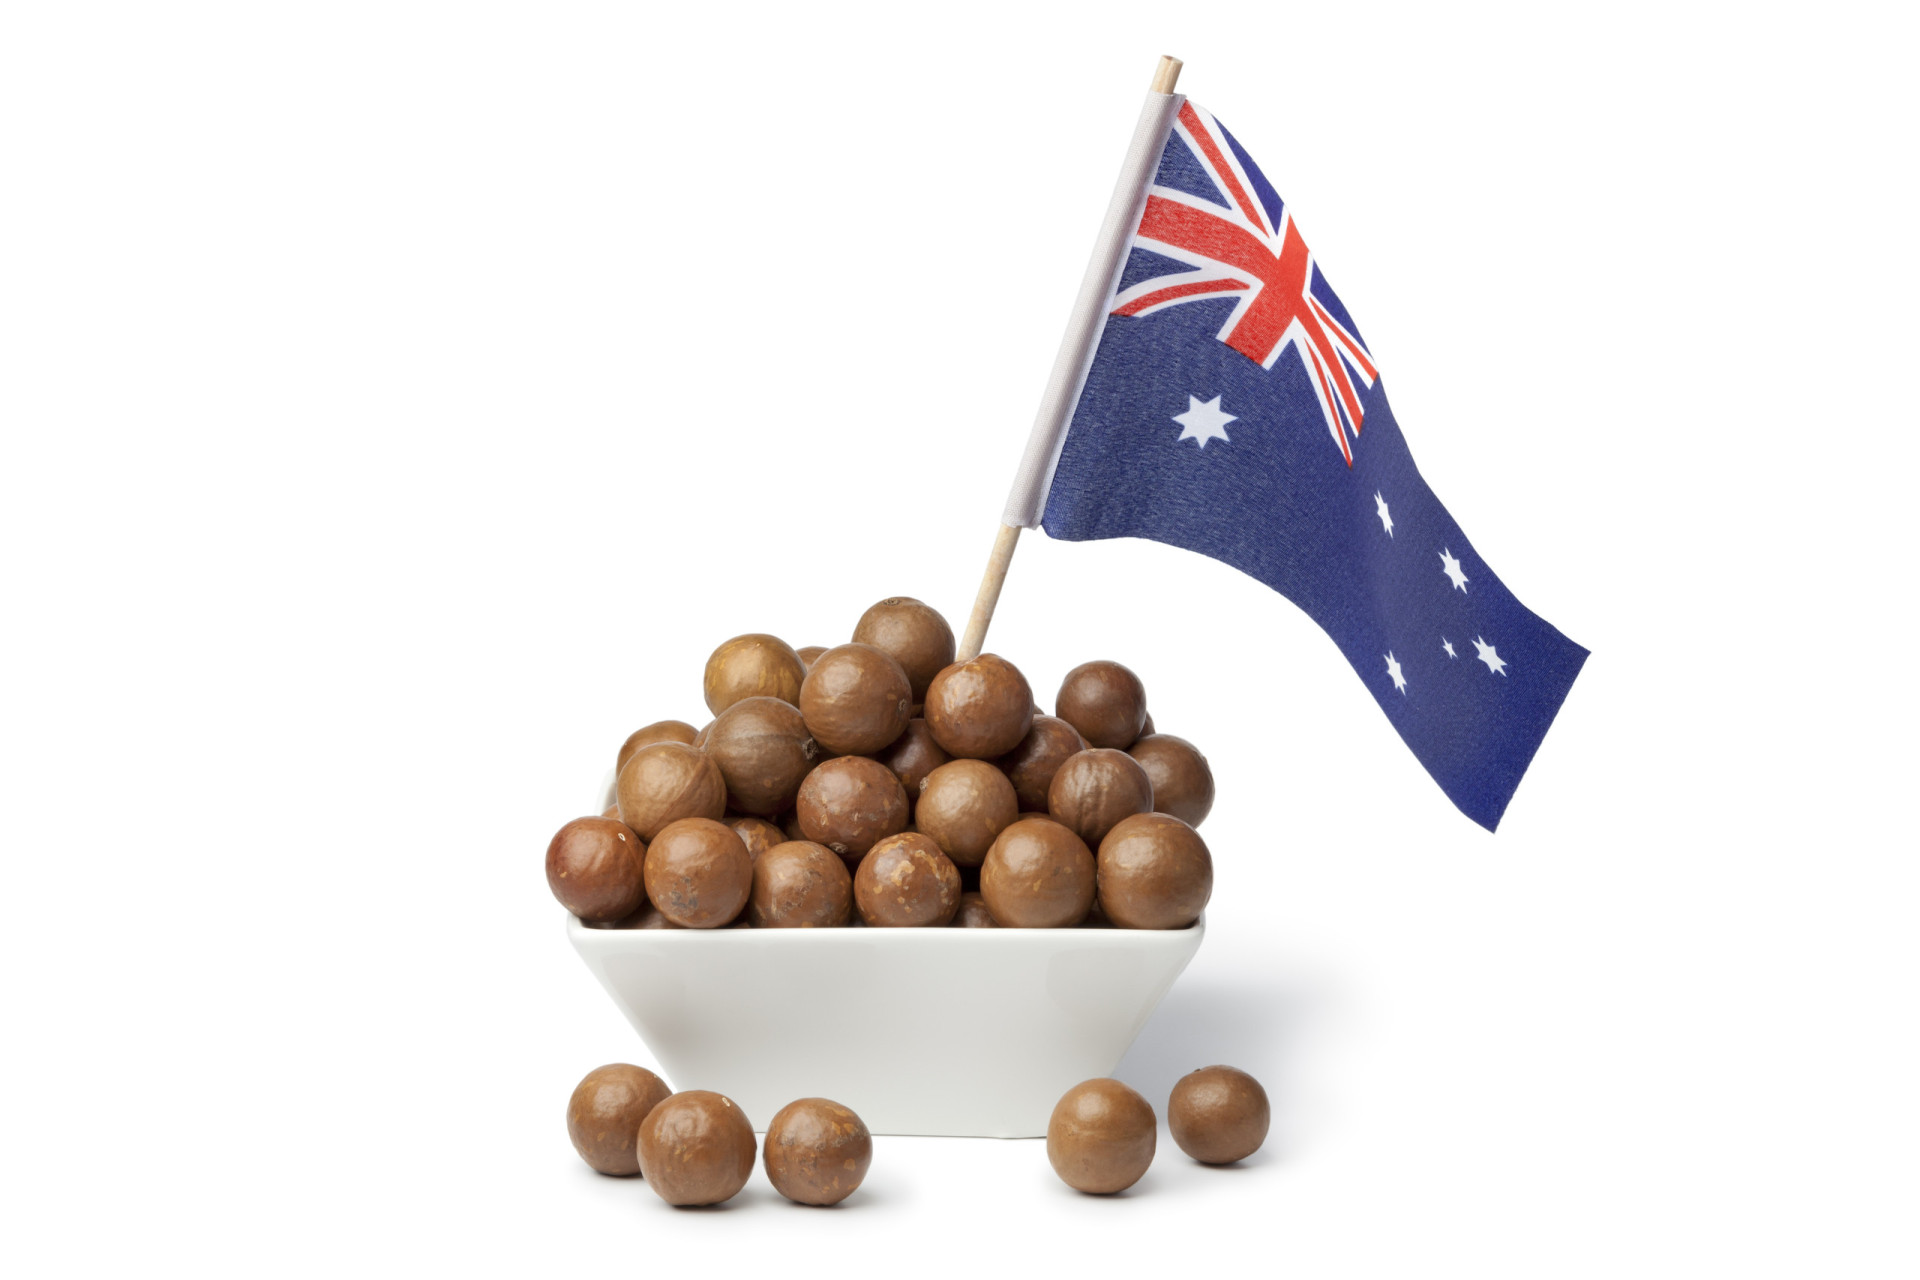 Cracking facts about macadamia nuts